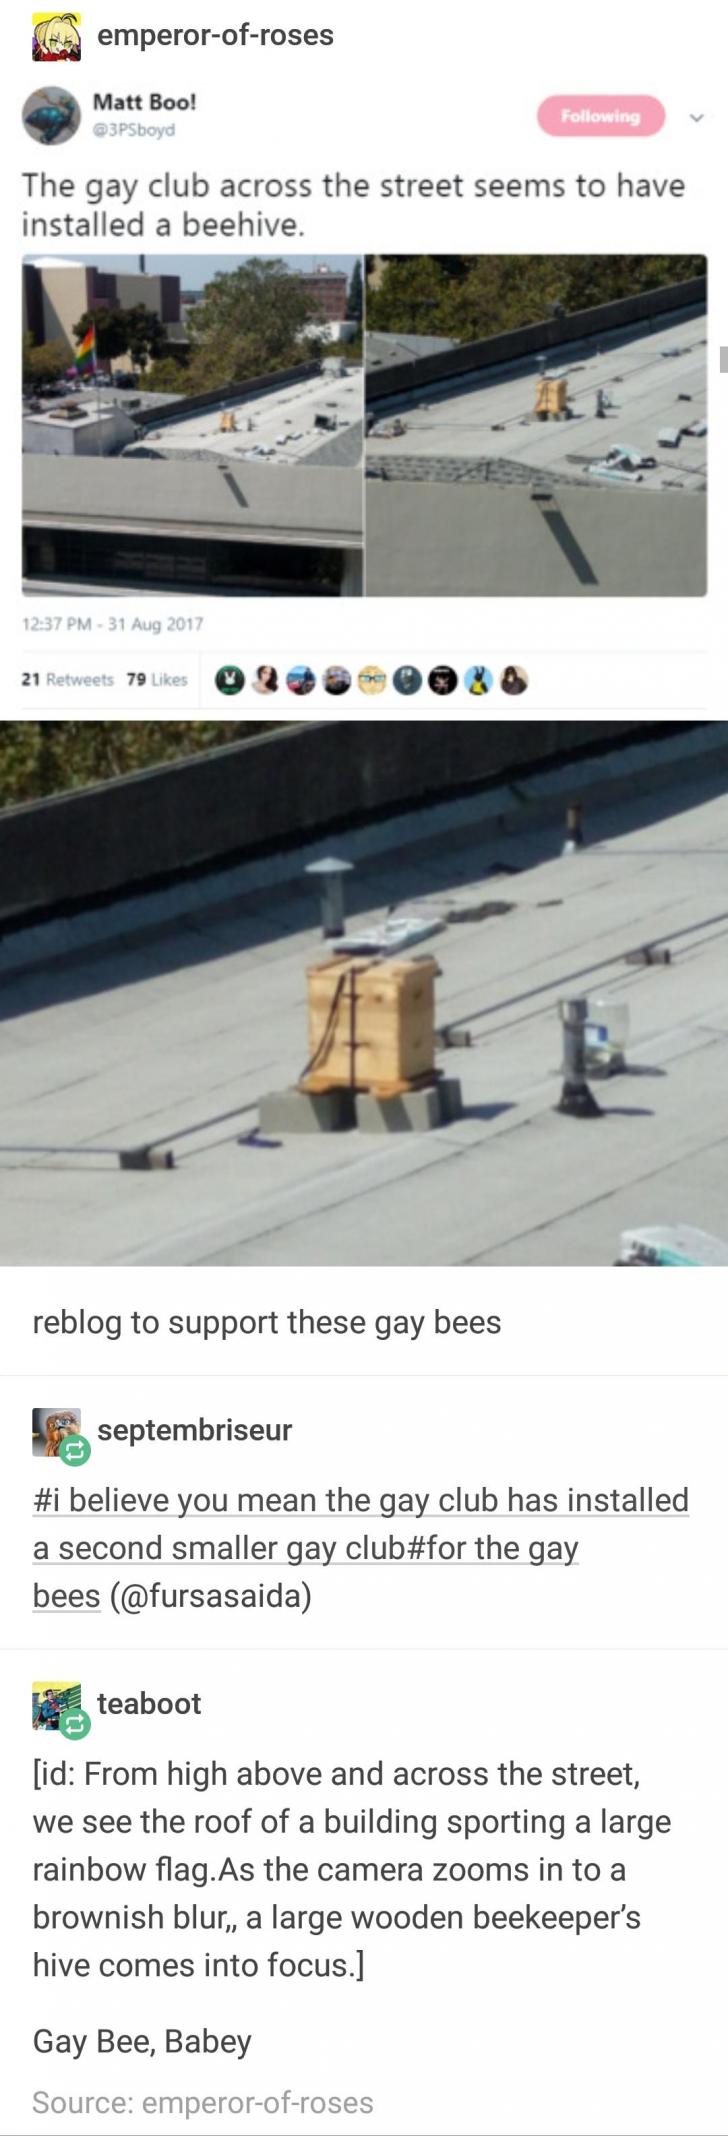 A second, smaller gay club for the bees.